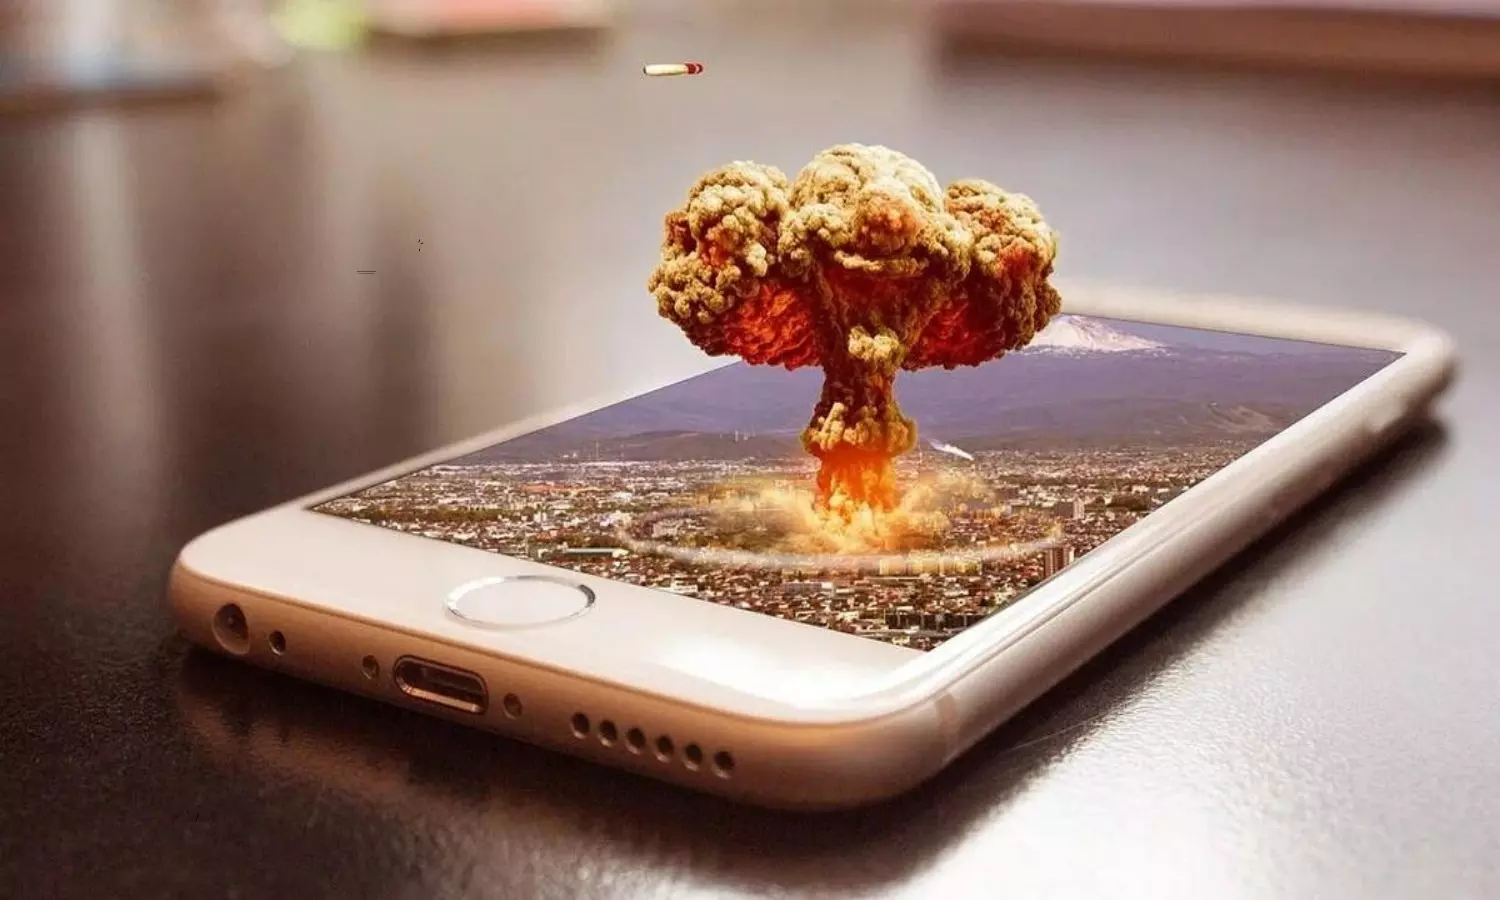 These are the basic symptoms that your smartphone may going to blast